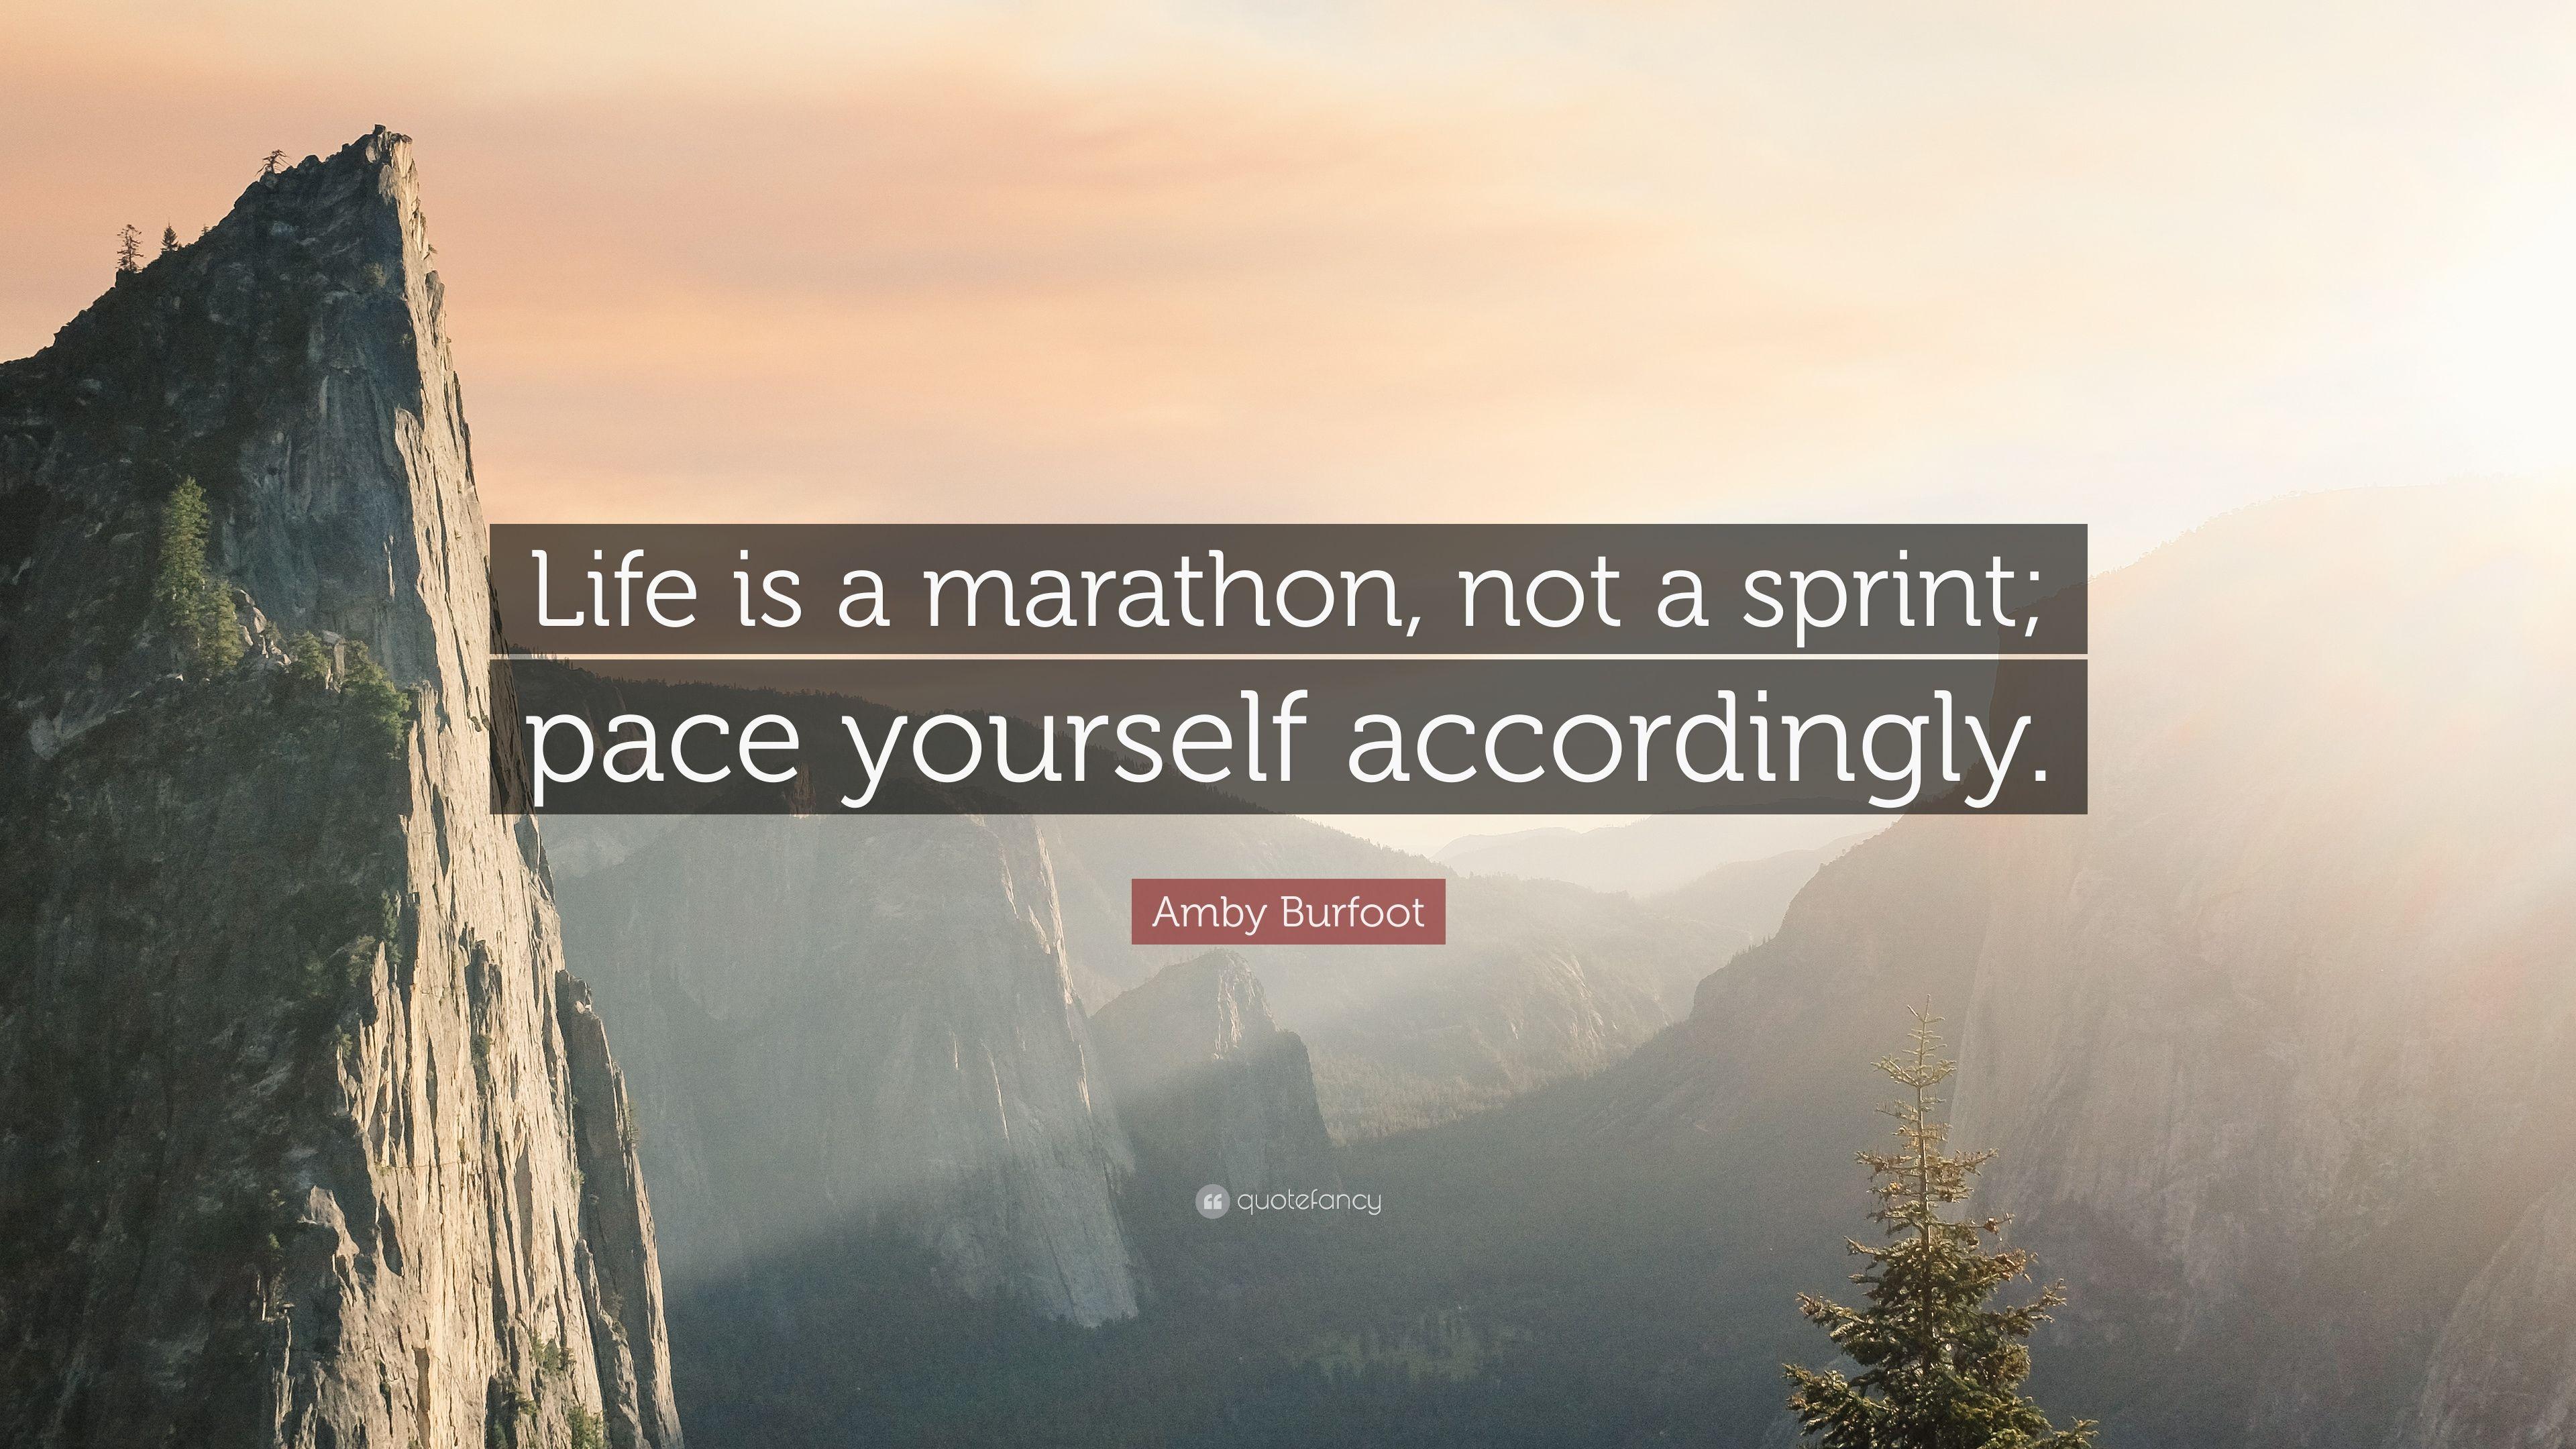 Amby Burfoot Quote: “Life is a marathon, not a sprint; pace